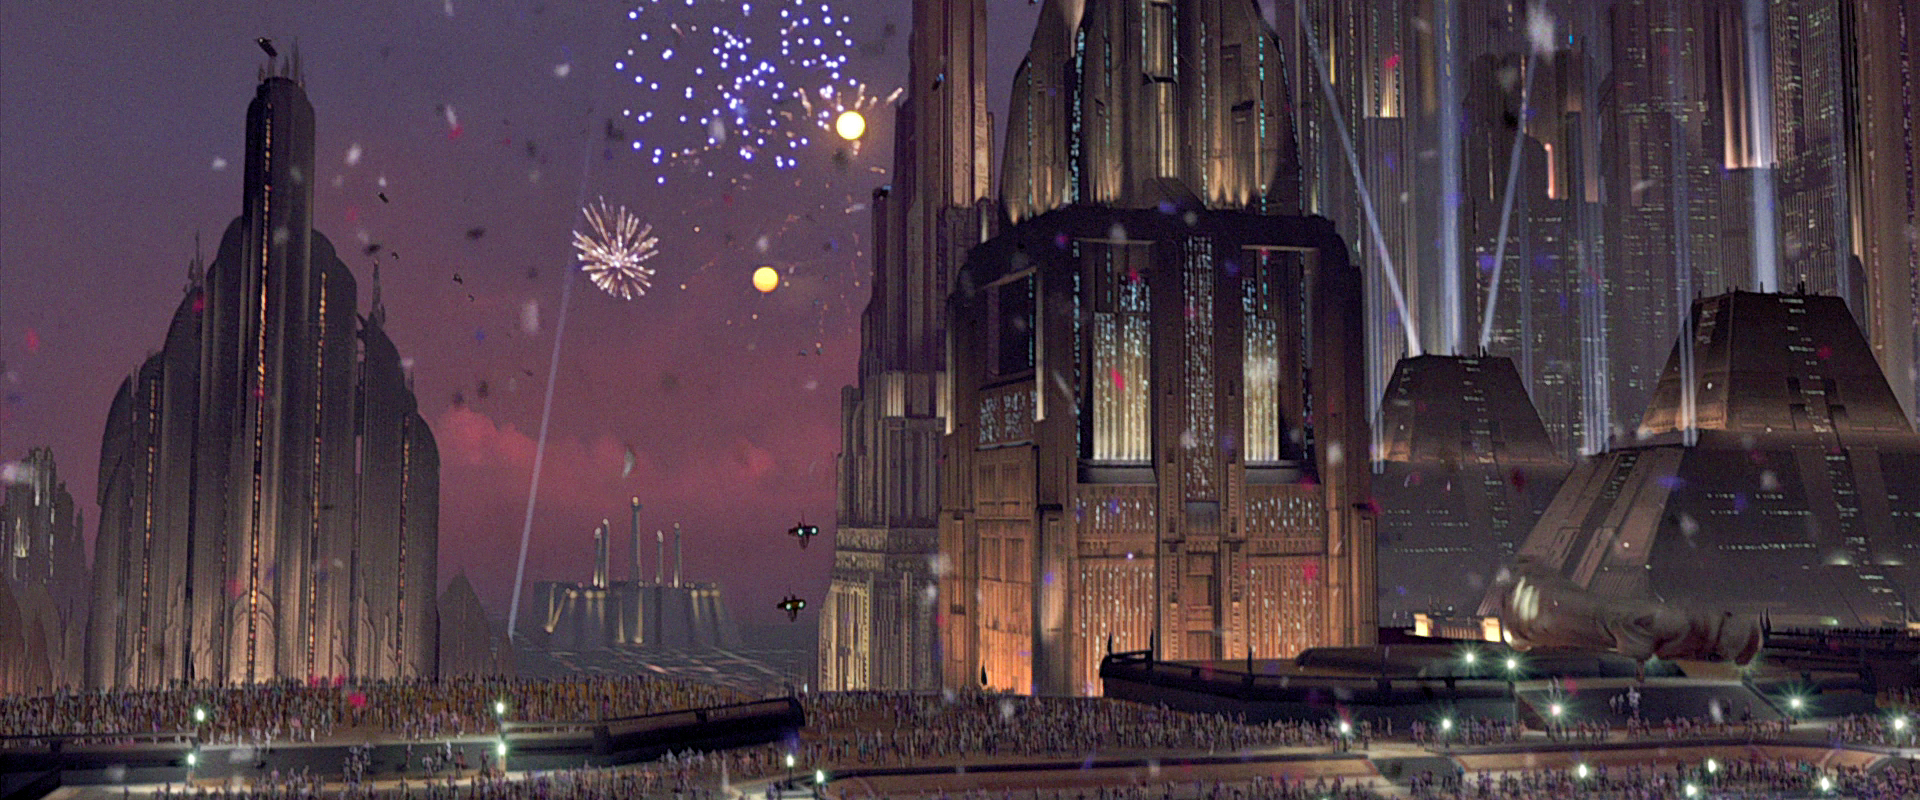 The Planet-City Coruscant in Star Wars